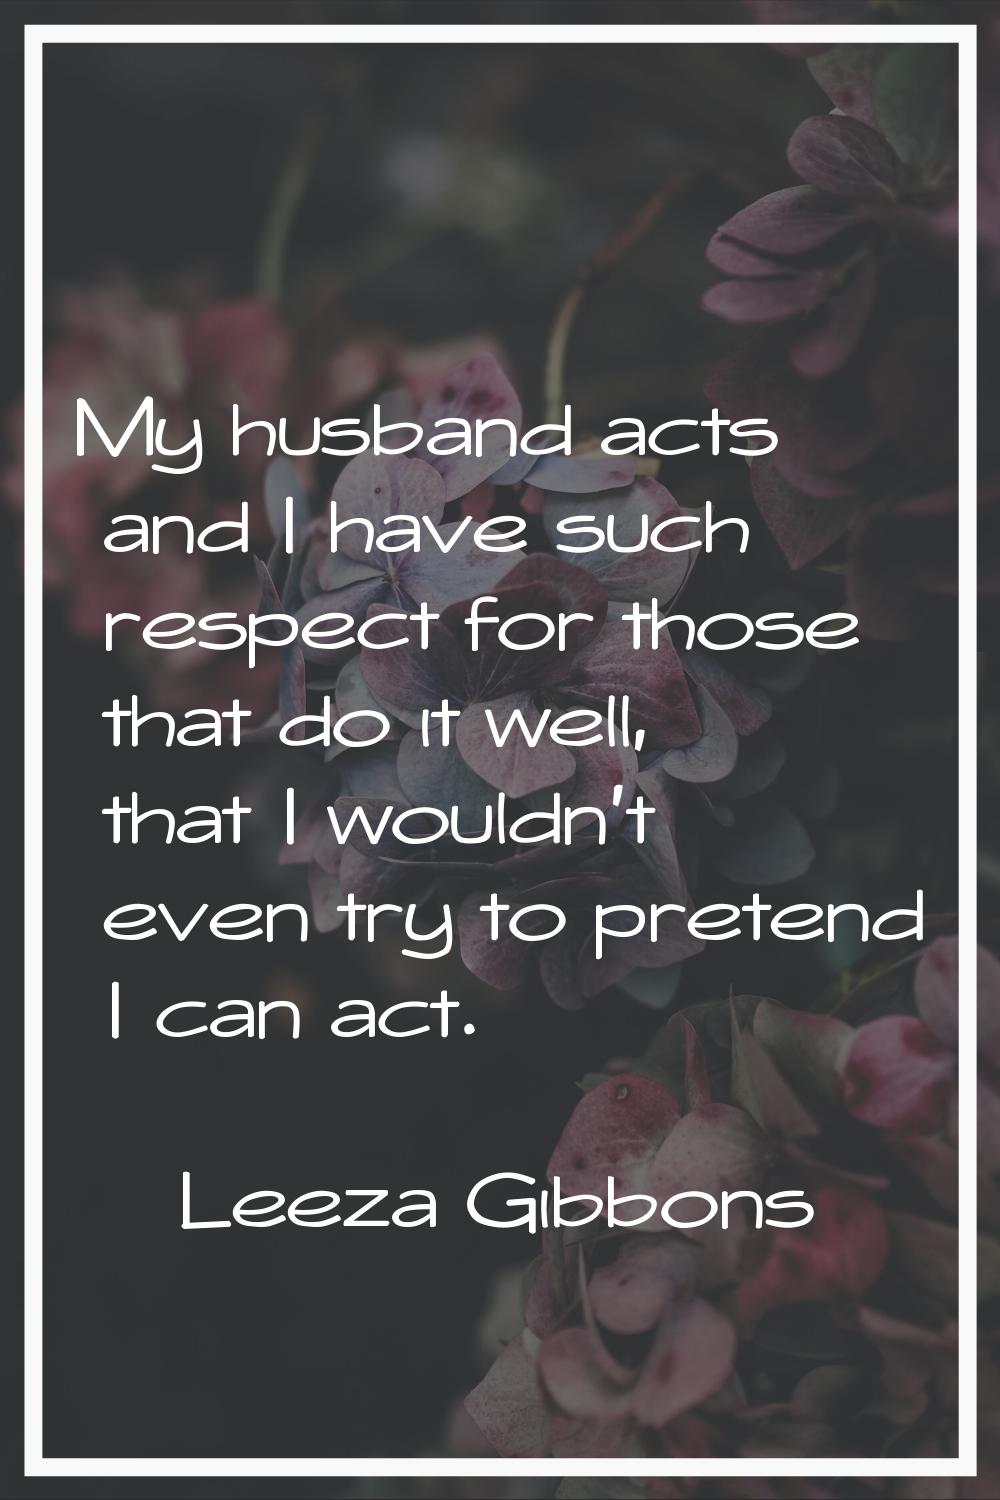 My husband acts and I have such respect for those that do it well, that I wouldn't even try to pret